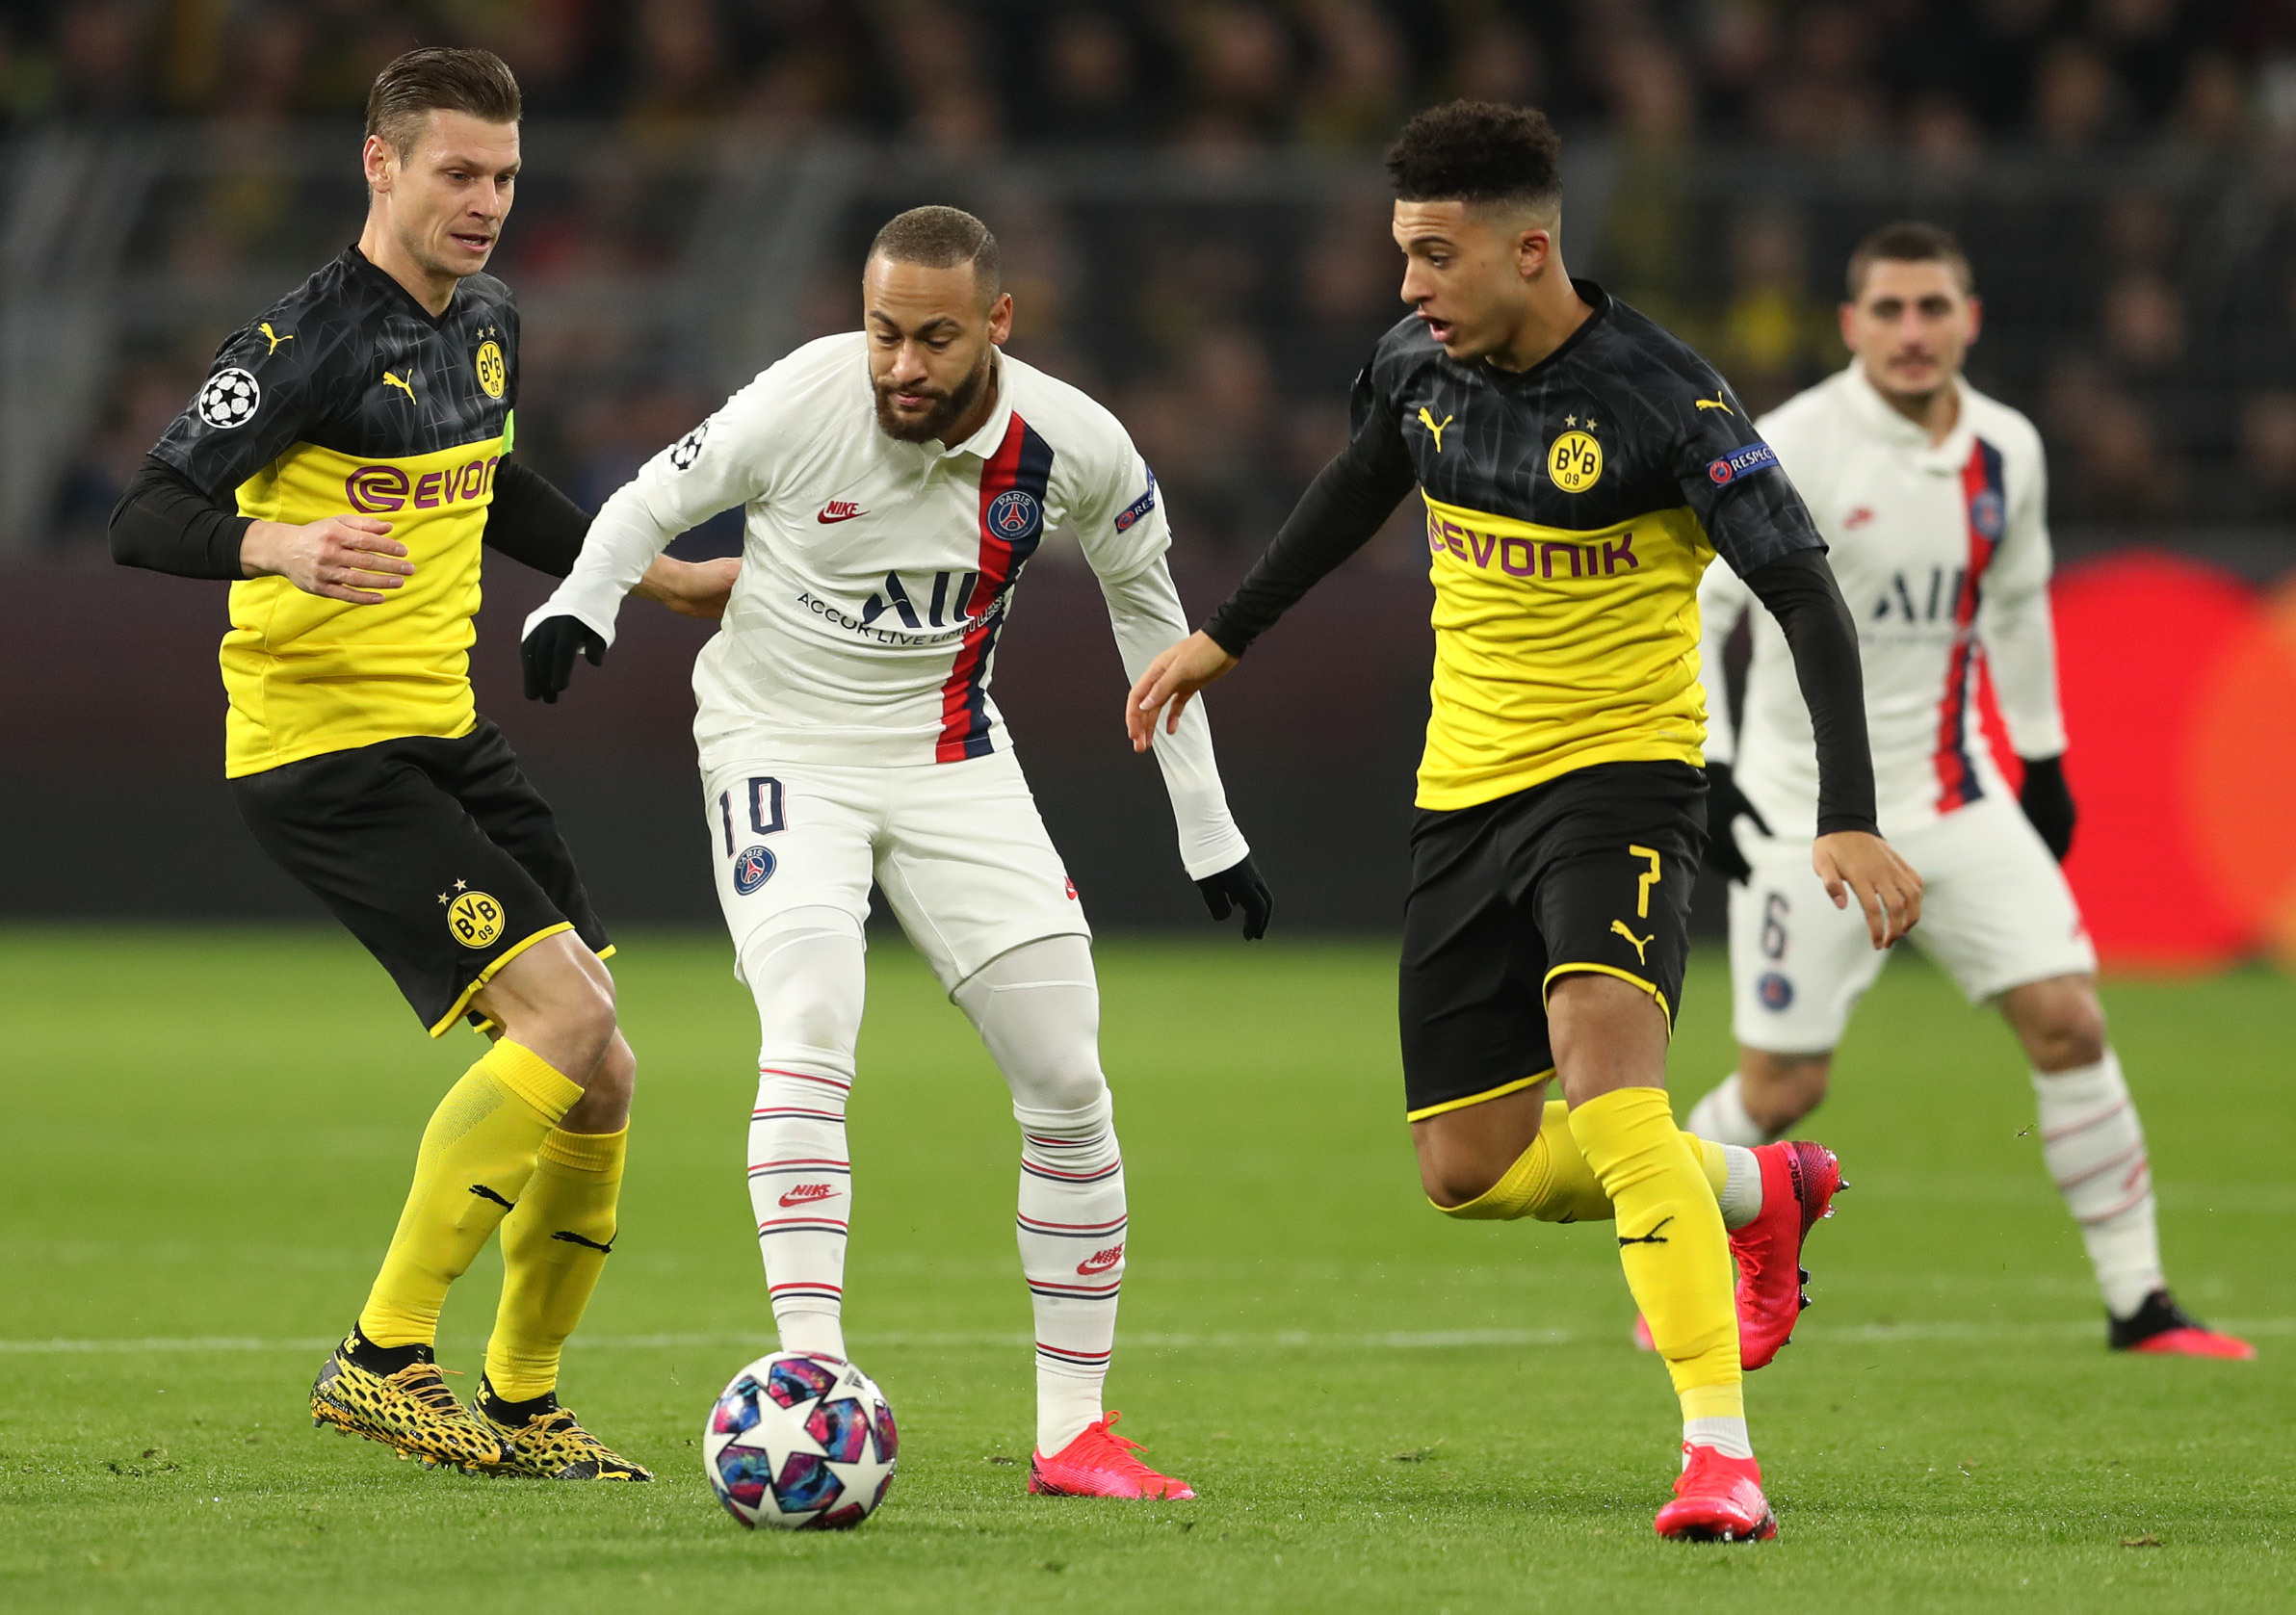 DORTMUND, GERMANY - FEBRUARY 18: Neymar of Paris Saint-Germain is challenged by Lukasz Piszczek and Jadon Sancho of Borussia Dortmund during the UEFA Champions League round of 16 first leg match between Borussia Dortmund and Paris Saint-Germain at Signal Iduna Park on February 18, 2020 in Dortmund, Germany. (Photo by Lars Baron/Bongarts/Getty Images)